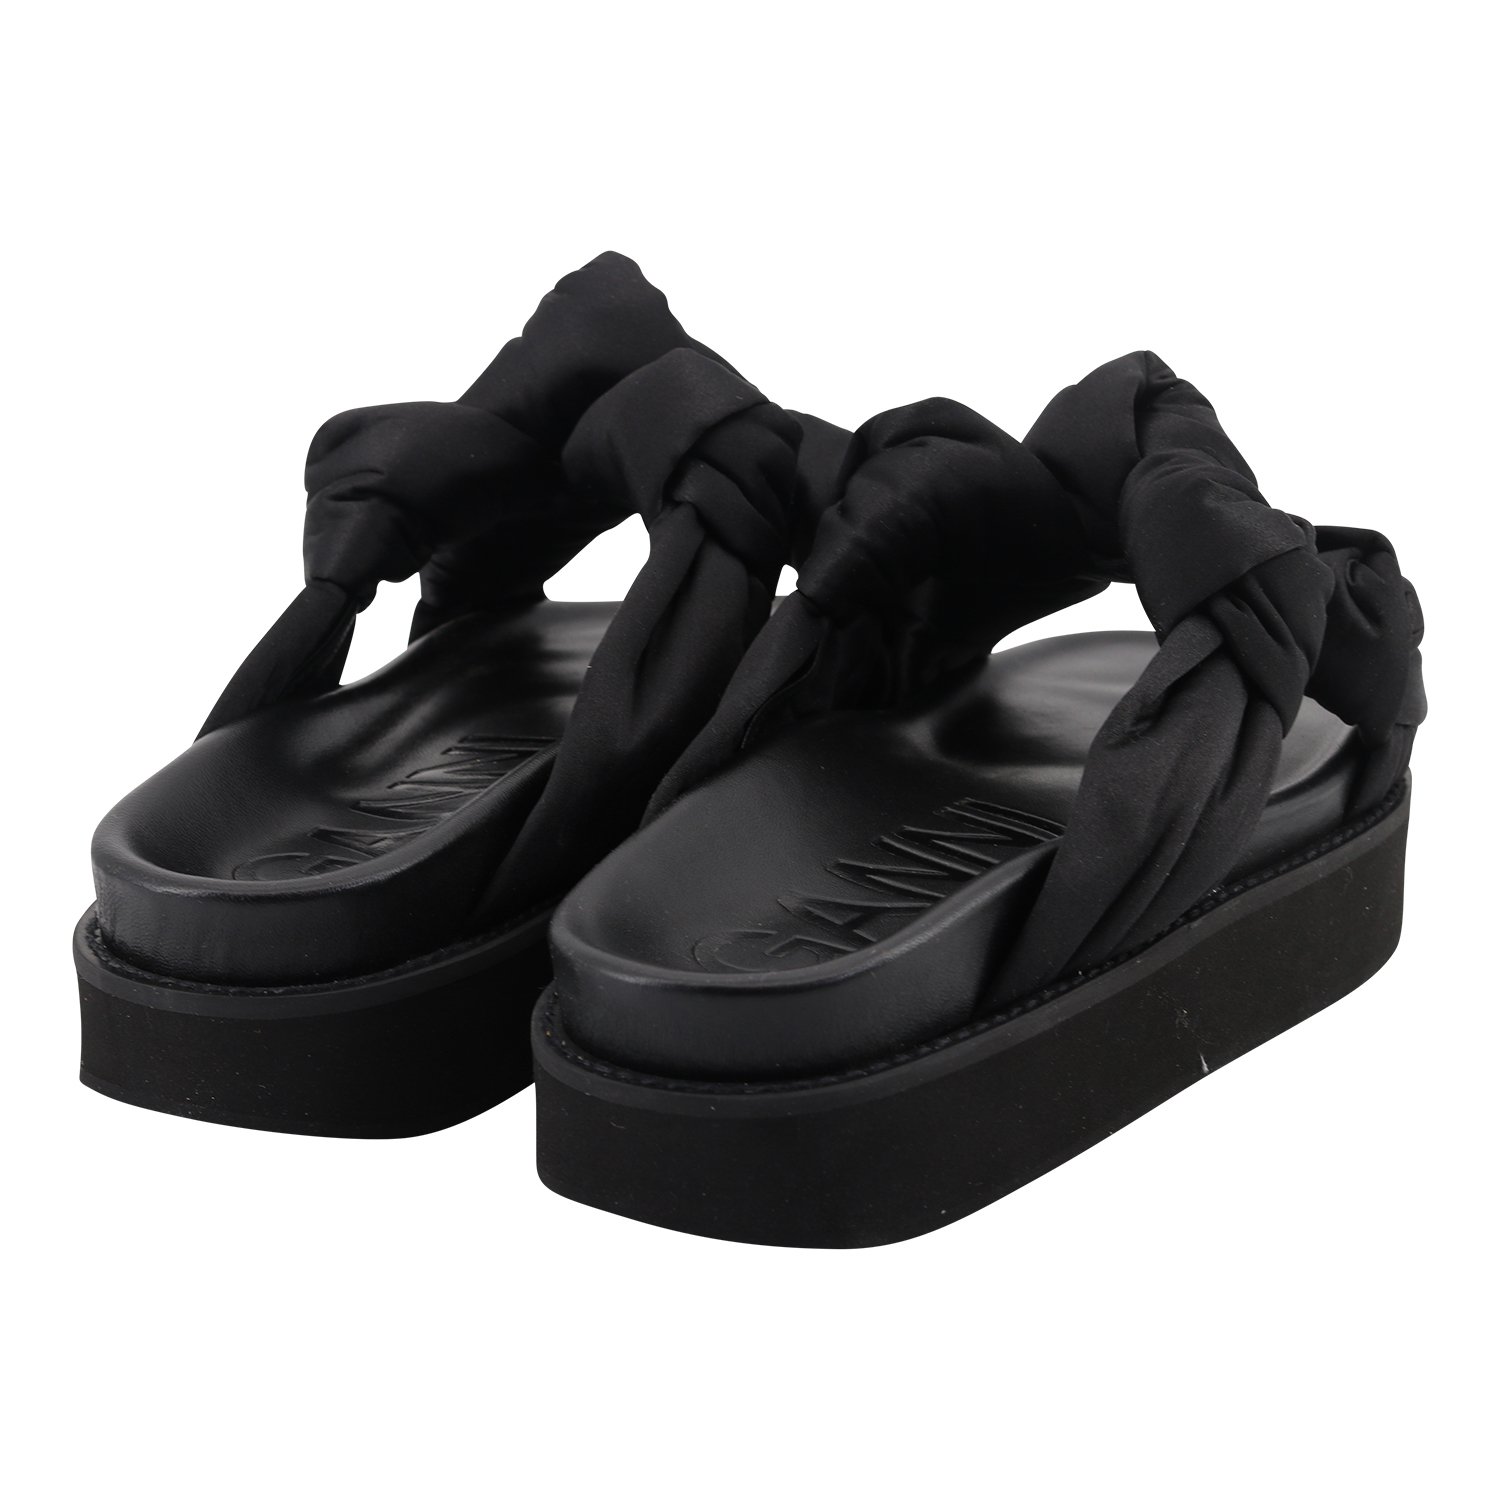 Ganni Mid Knotted Sandal Recycled Satin Black 40